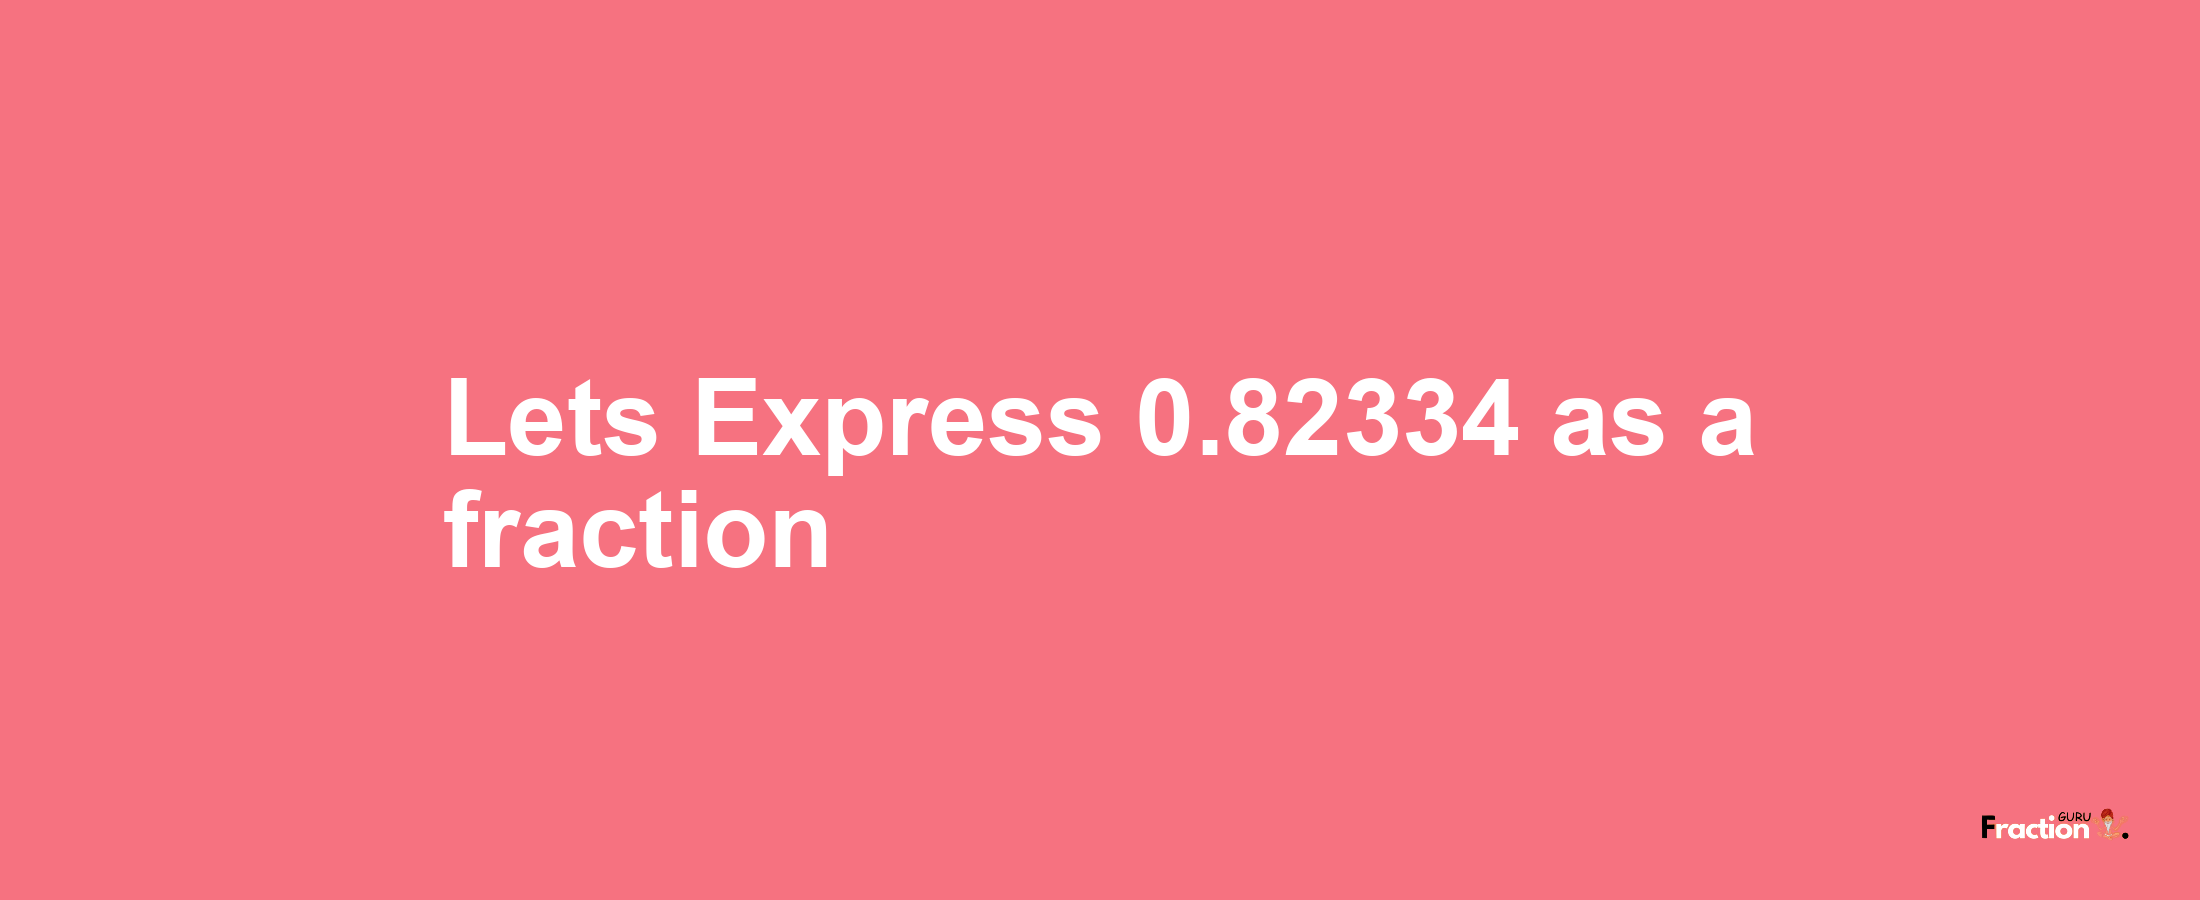 Lets Express 0.82334 as afraction